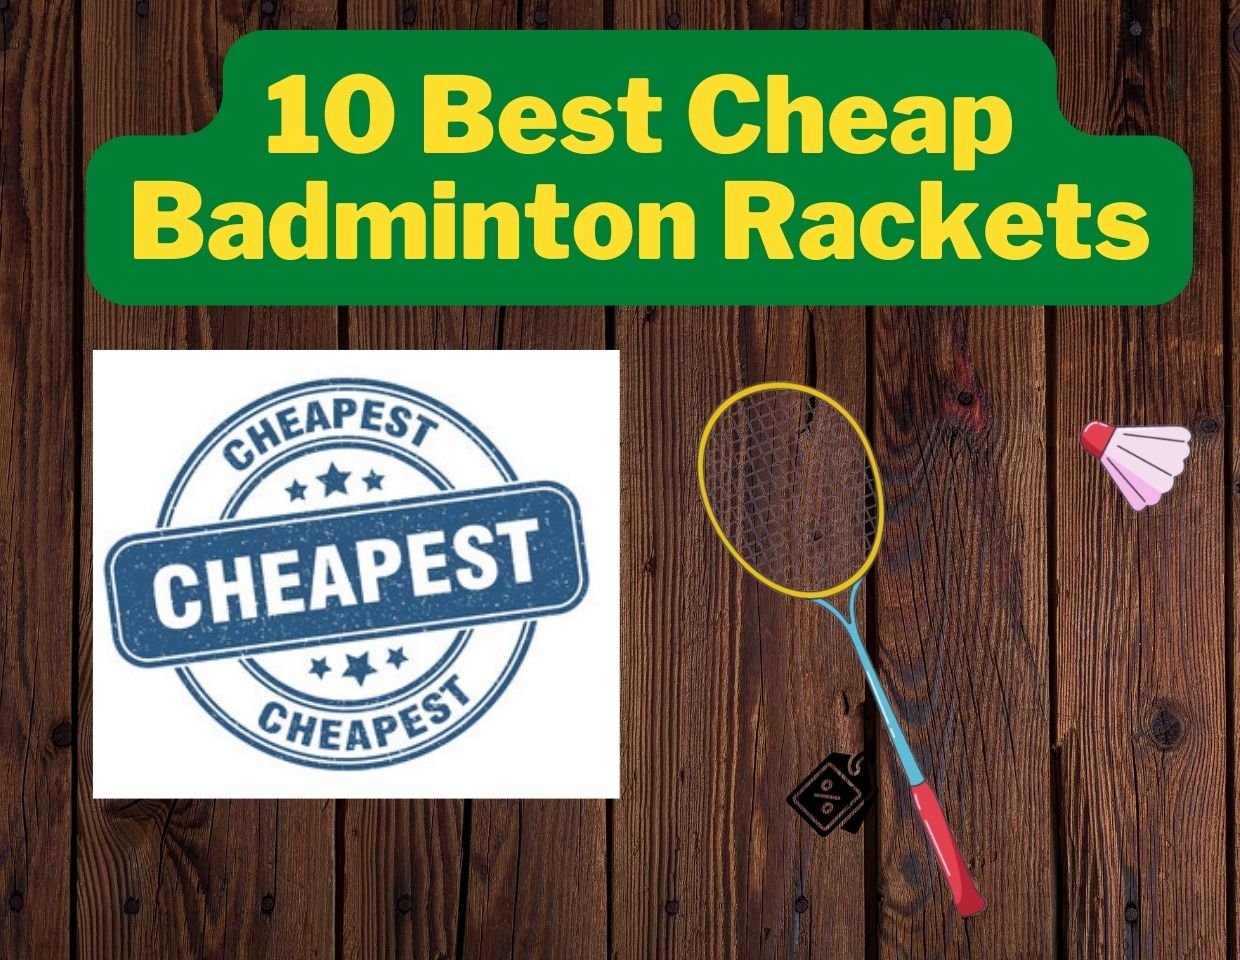 10 Best Cheap Badminton Rackets in India [Reviews]